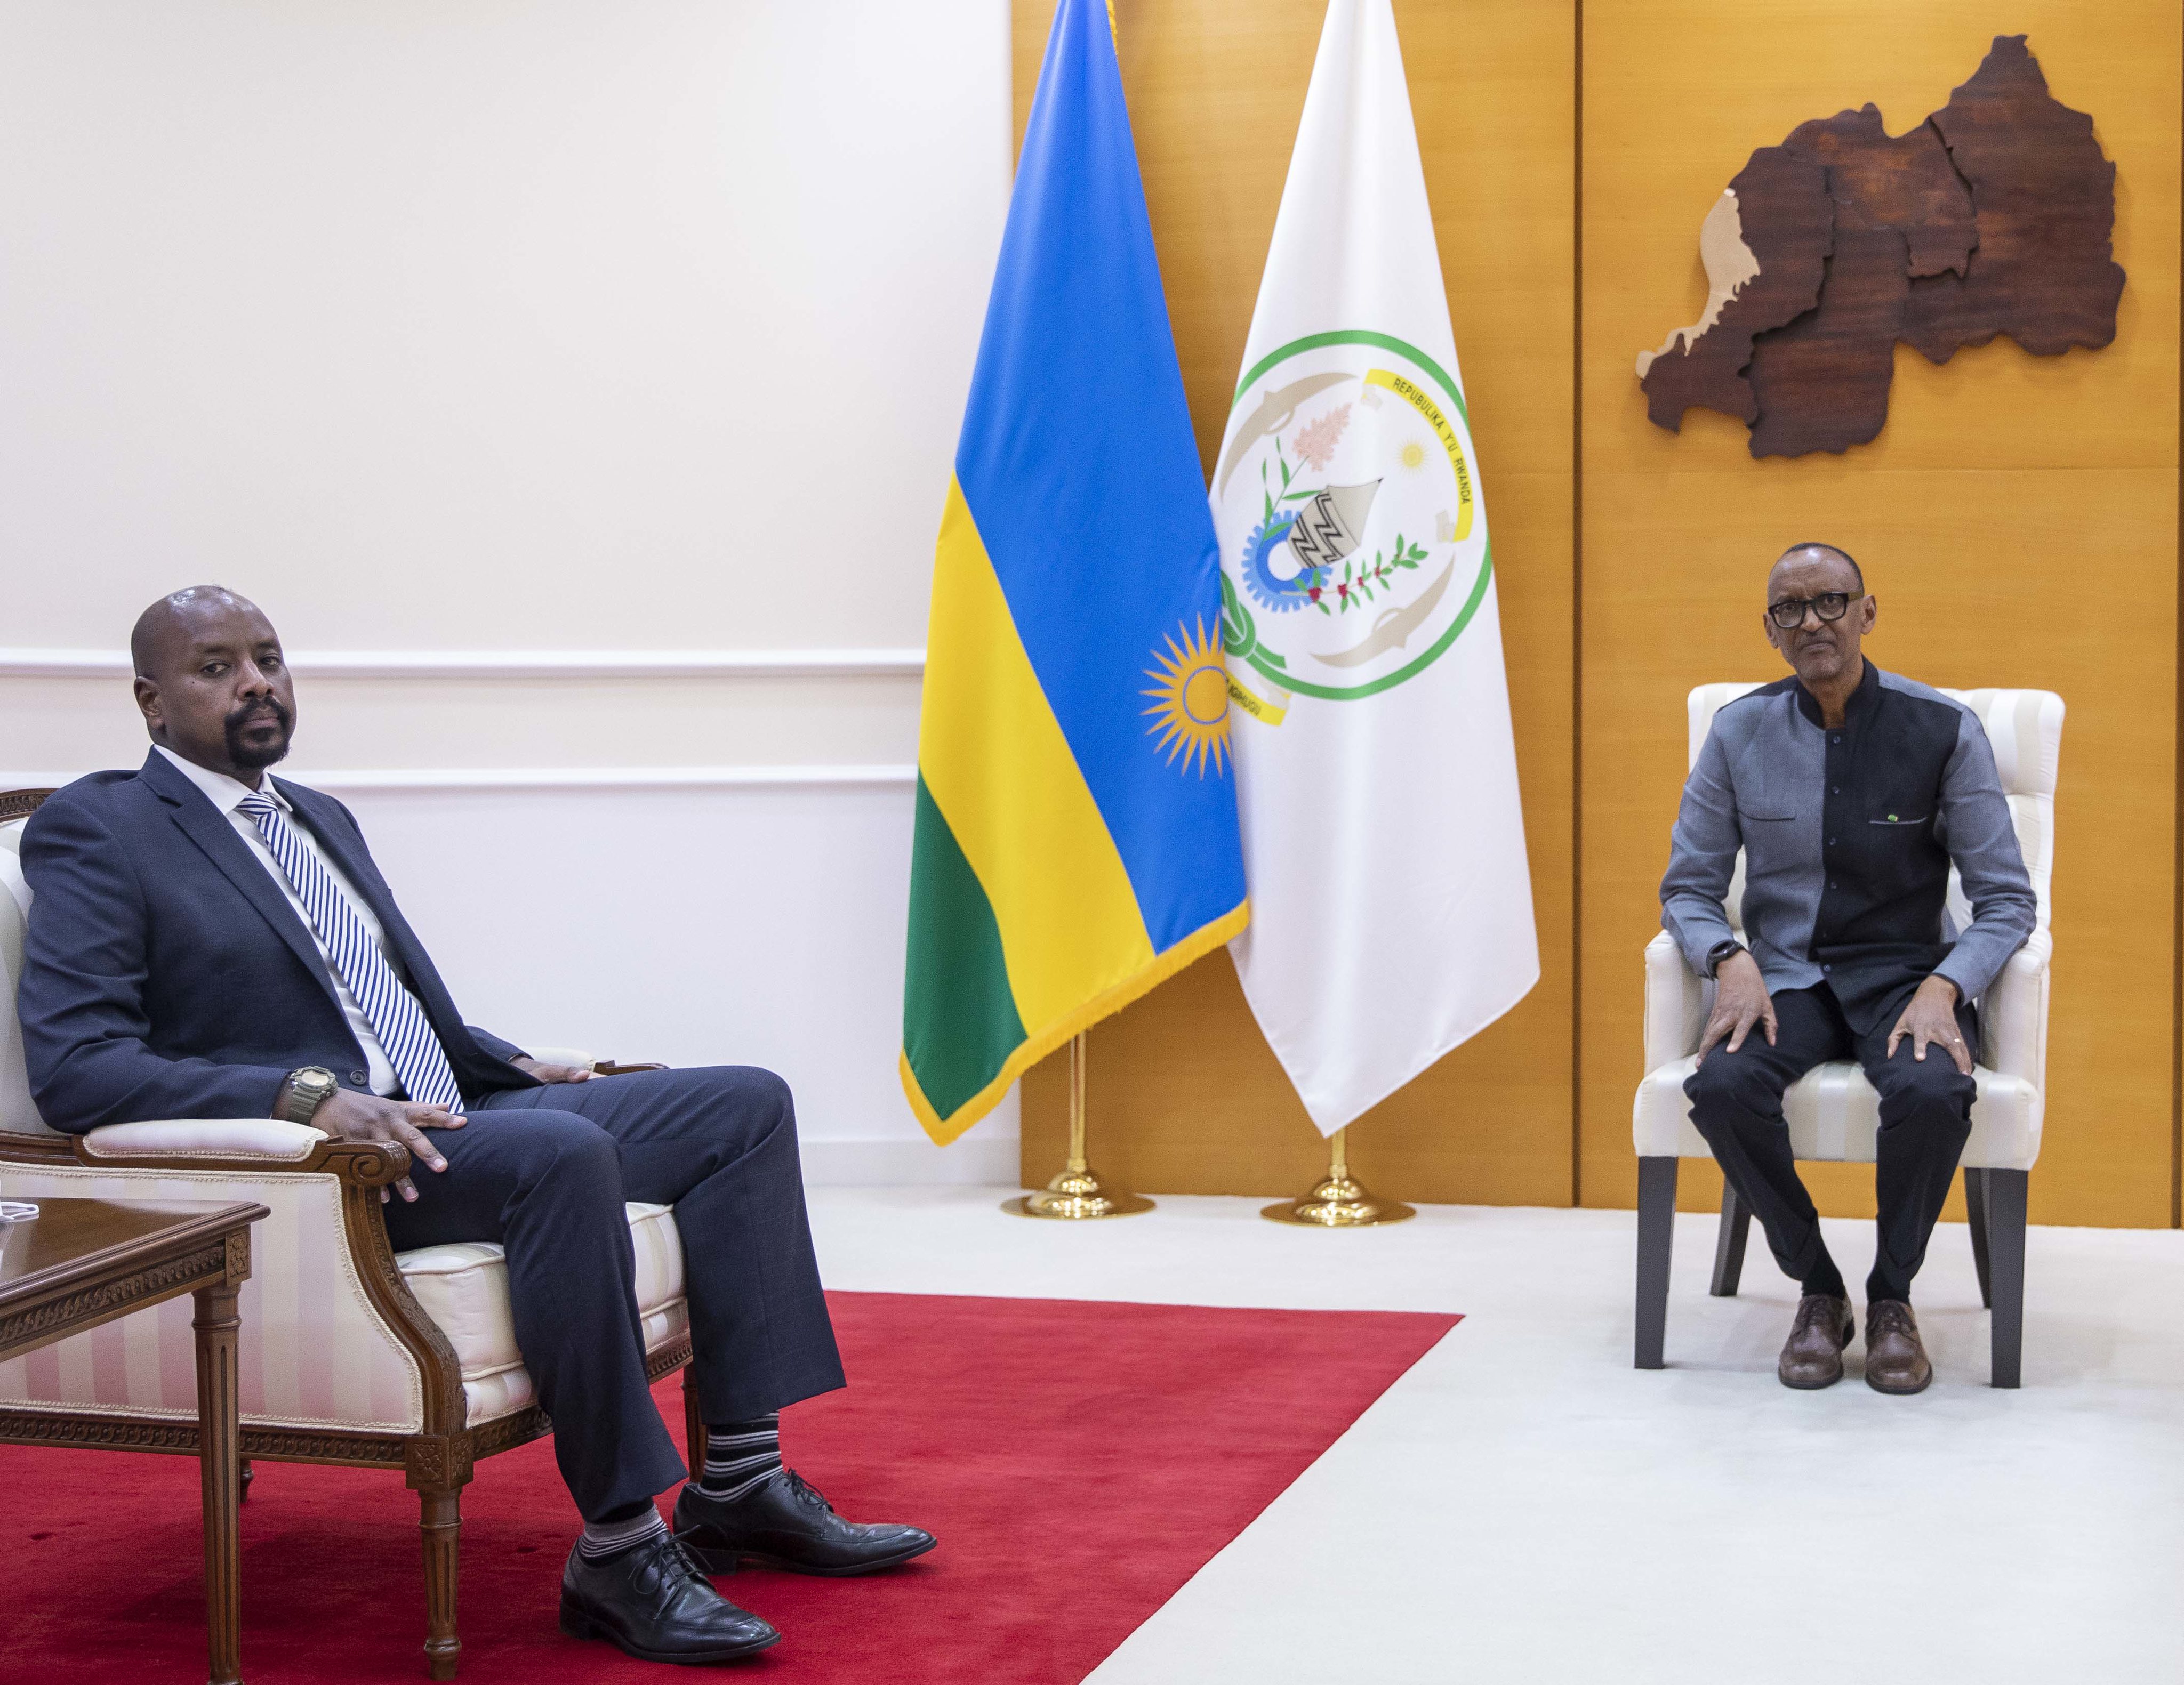 President Kagame receives Lt Gen Muhoozi Kainerugaba, the Commander of UPDF Land Forces and senior presidential advisor on special operations, to discuss Rwanda-Uganda relations in Kigali on Monday, March14, 2022. 